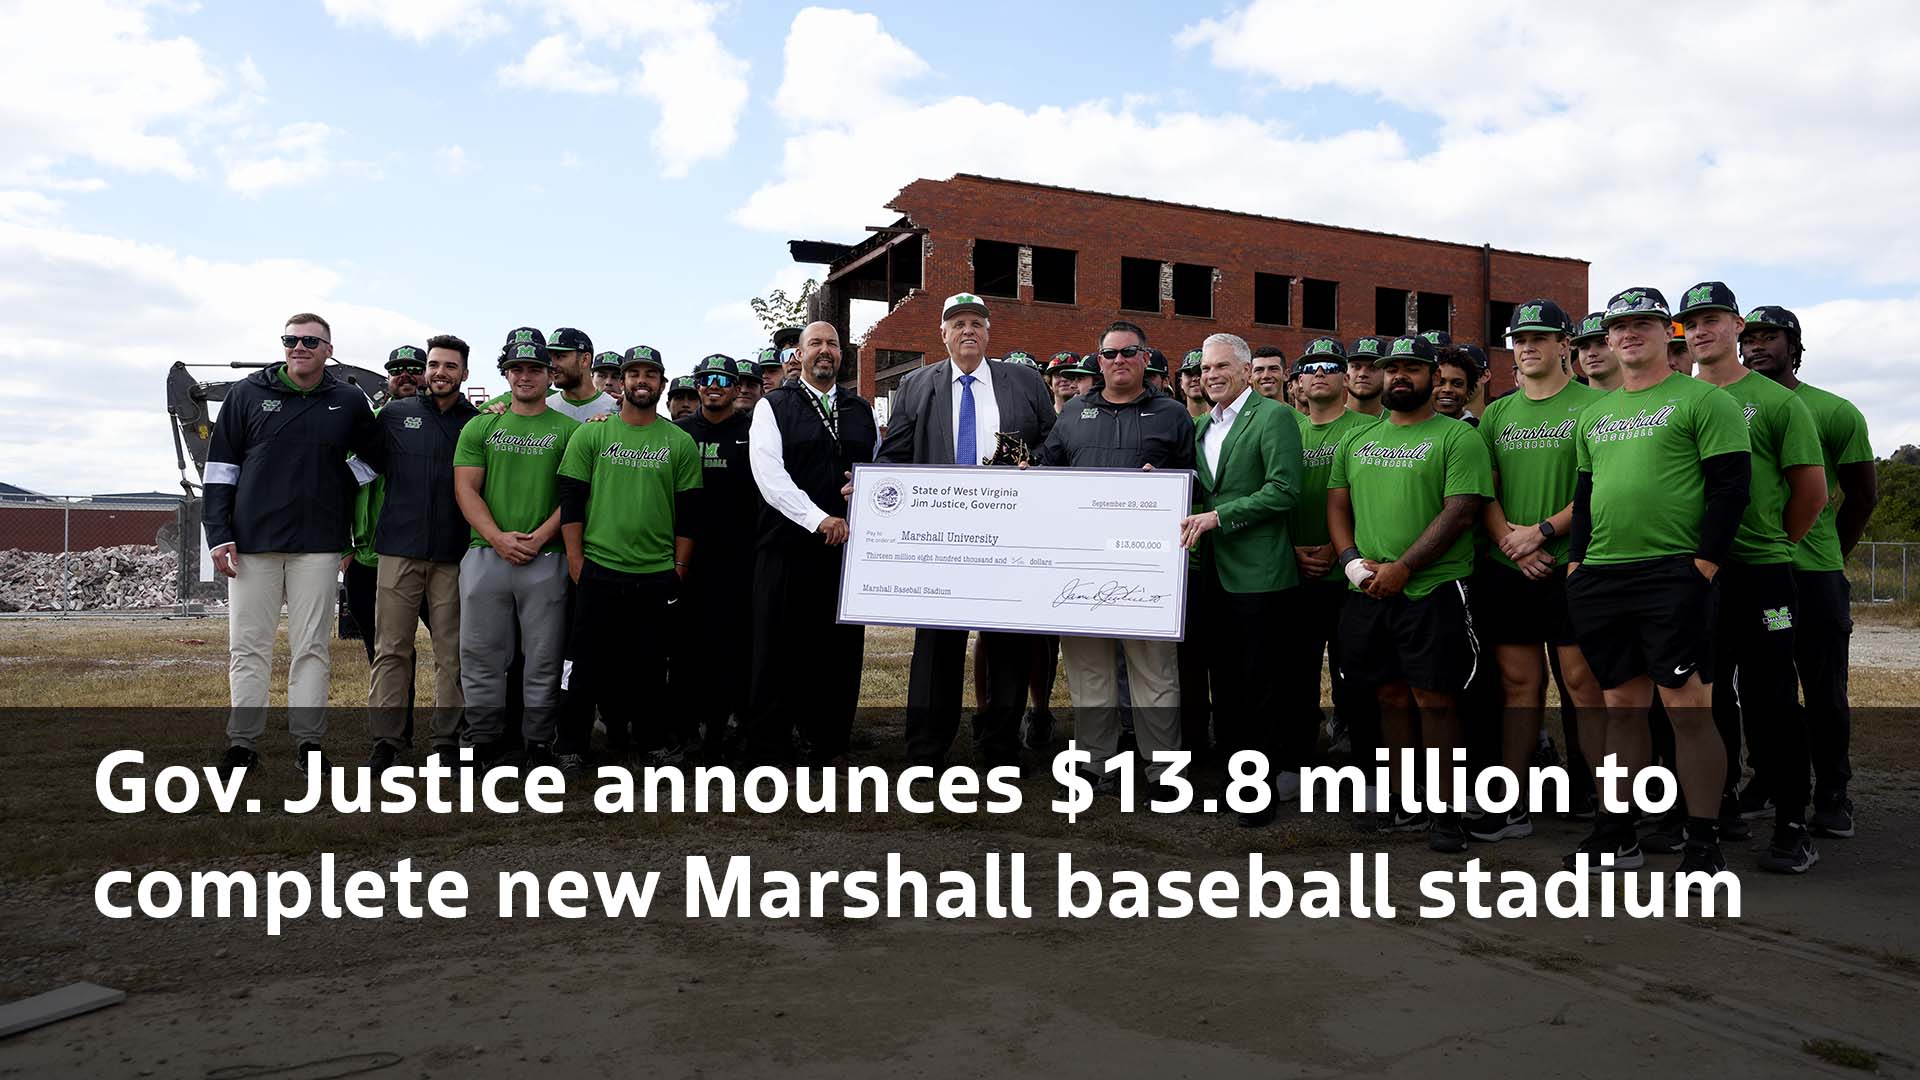 Gov. Justice announces $13.8 million to complete new Marshall baseball stadium - Governor Jim Justice